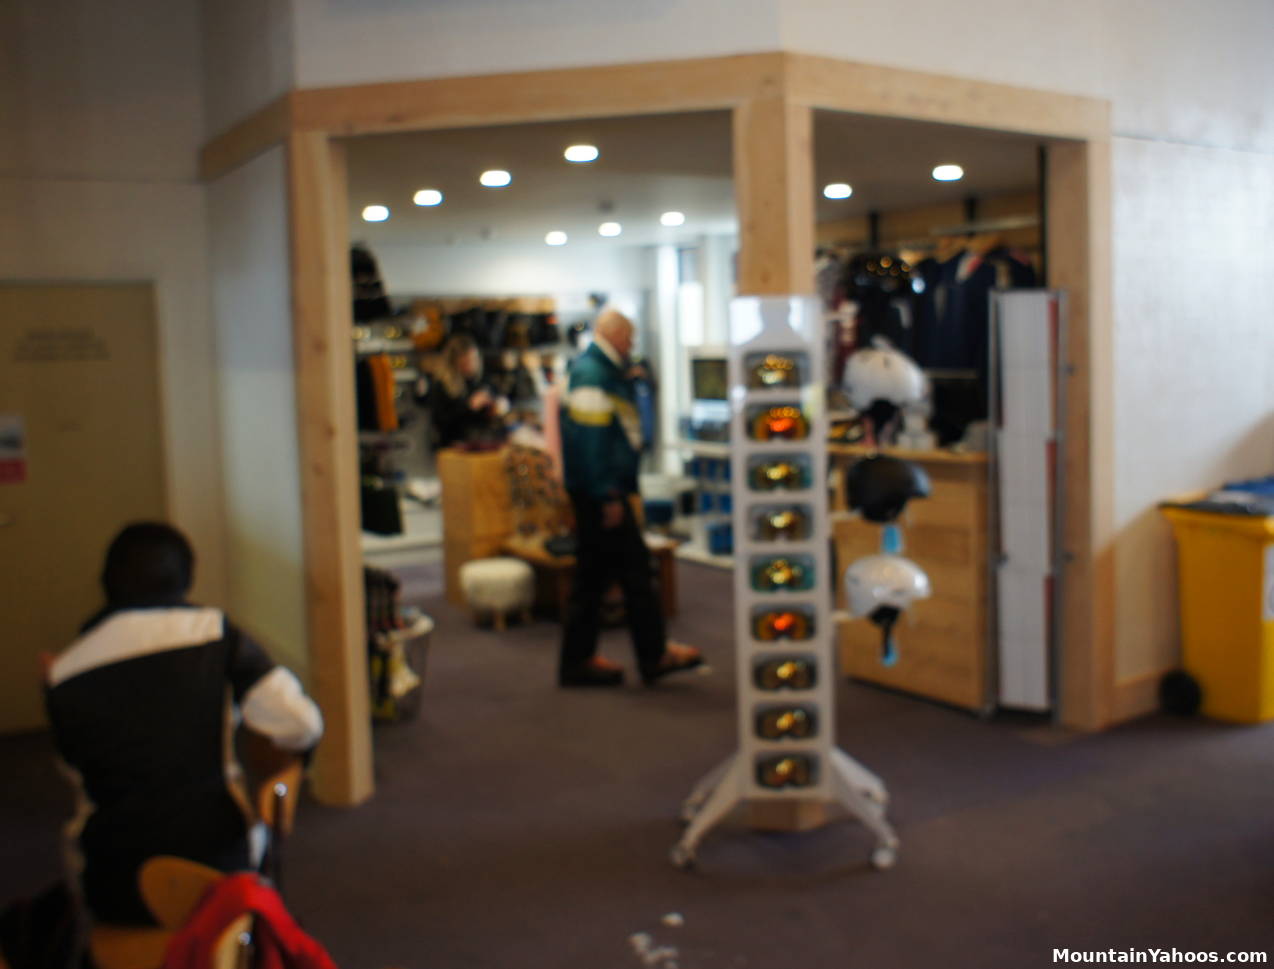 Inside the retail shop at the base of Treble Cone